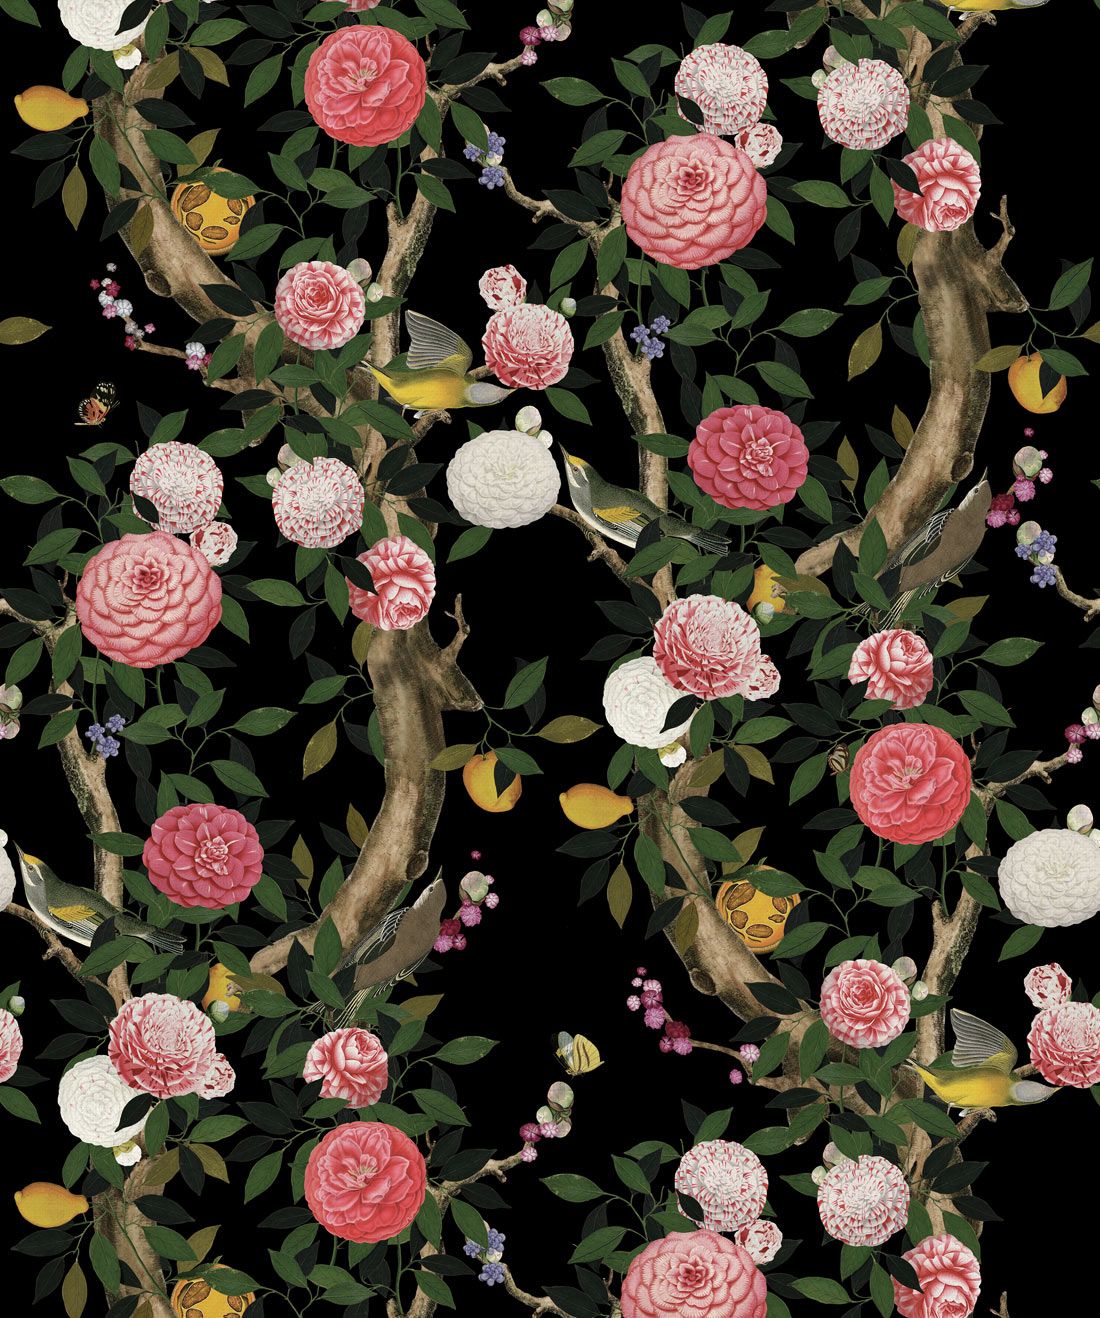 Garden Bloom in Black is a stunning chinoiserie wallpaper